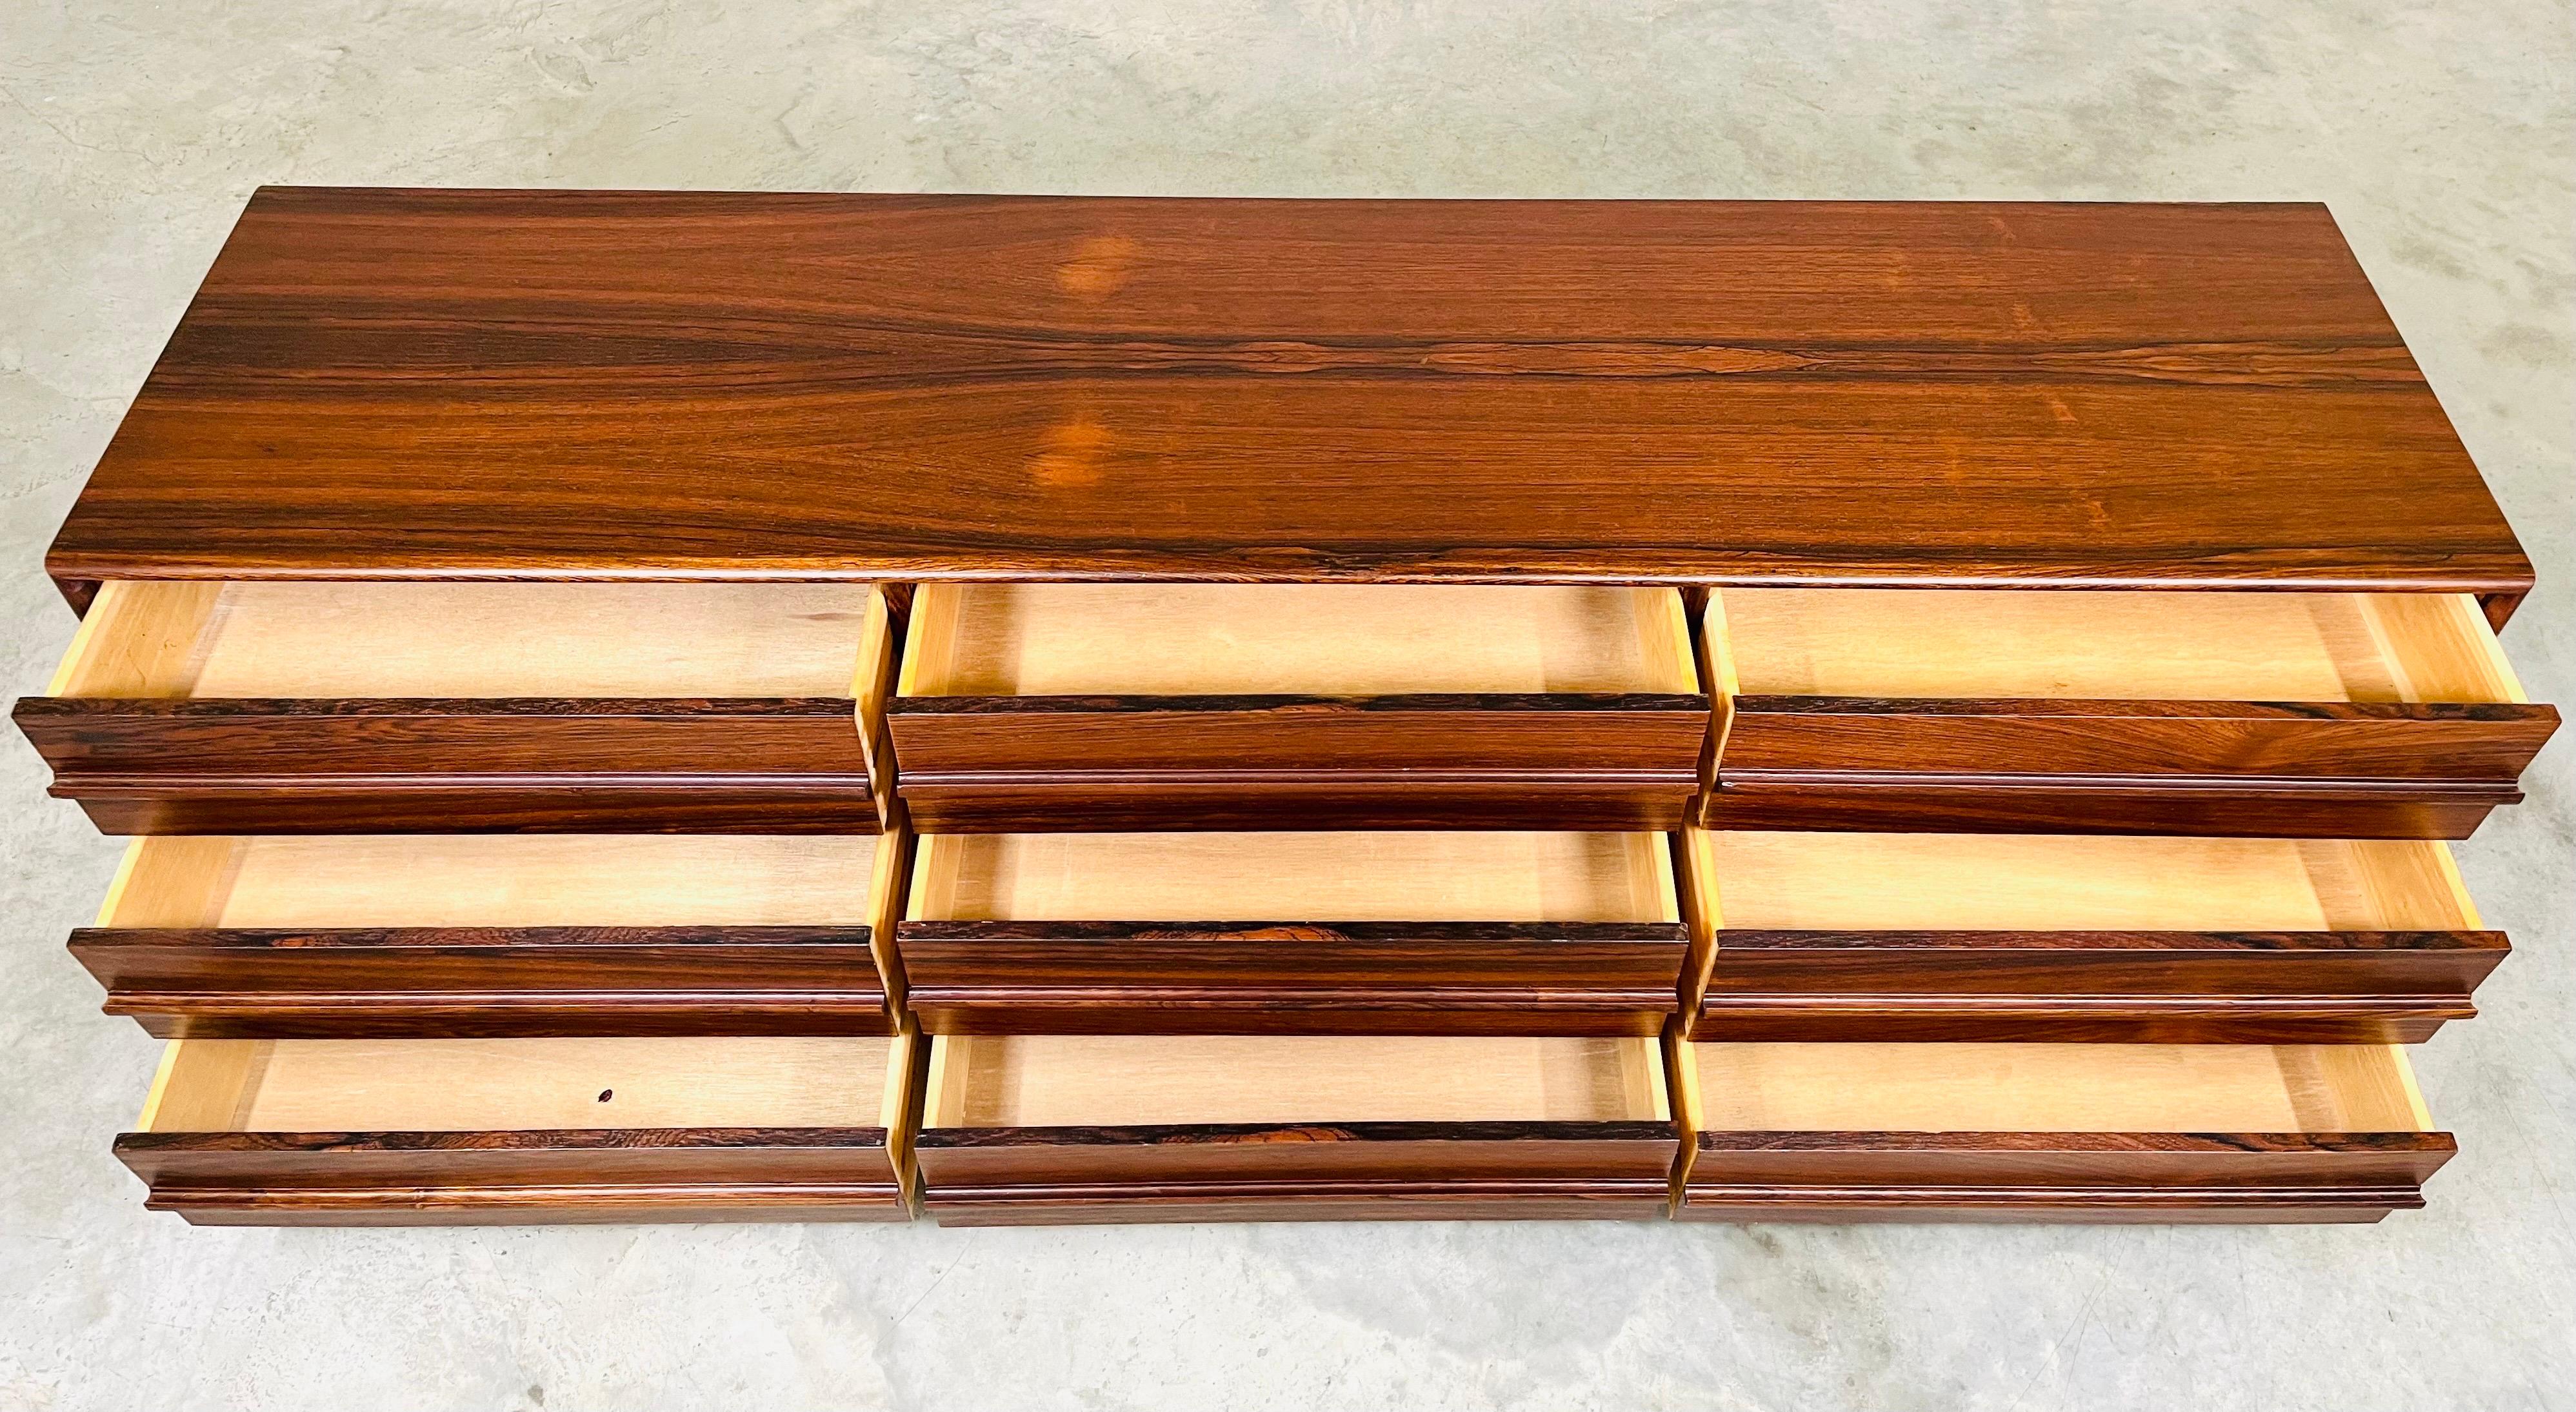 A stunning Brazilian Rosewood 9-drawer triple dresser in the manner of Arne Vodder by Inter-Continental-Design Limited of Canada circa 1970. 
Stunning grain throughout. All drawer fronts are book matched having sculptural pulls with dovetail